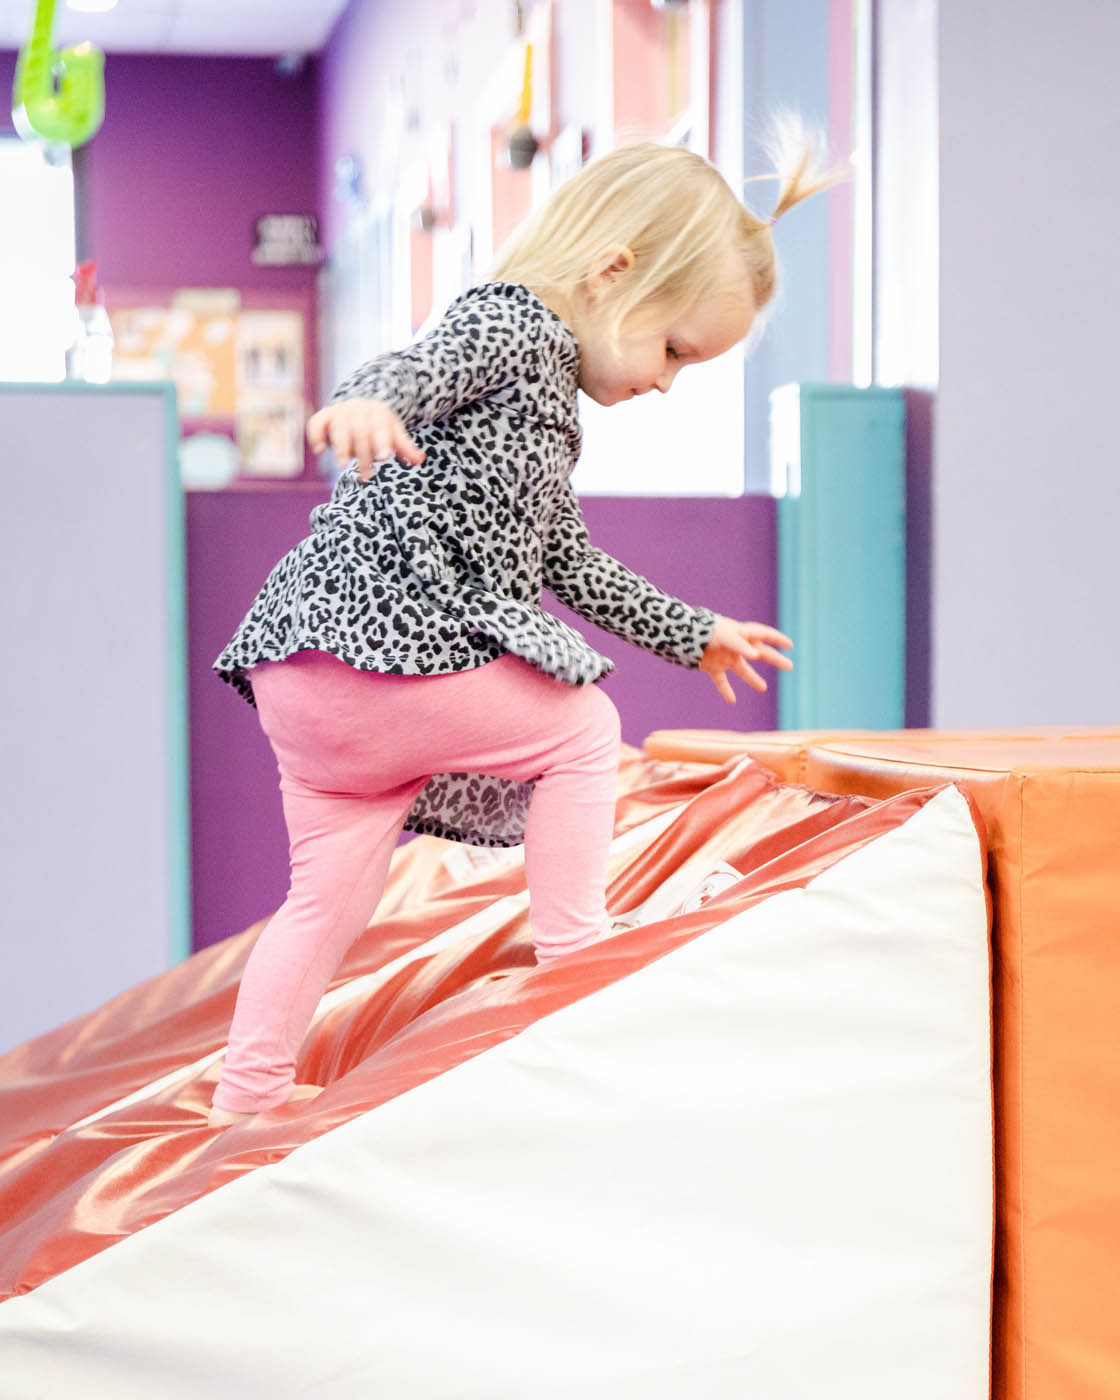 A girl climbing on soft gym equipment for gymnastics for 2 year olds.